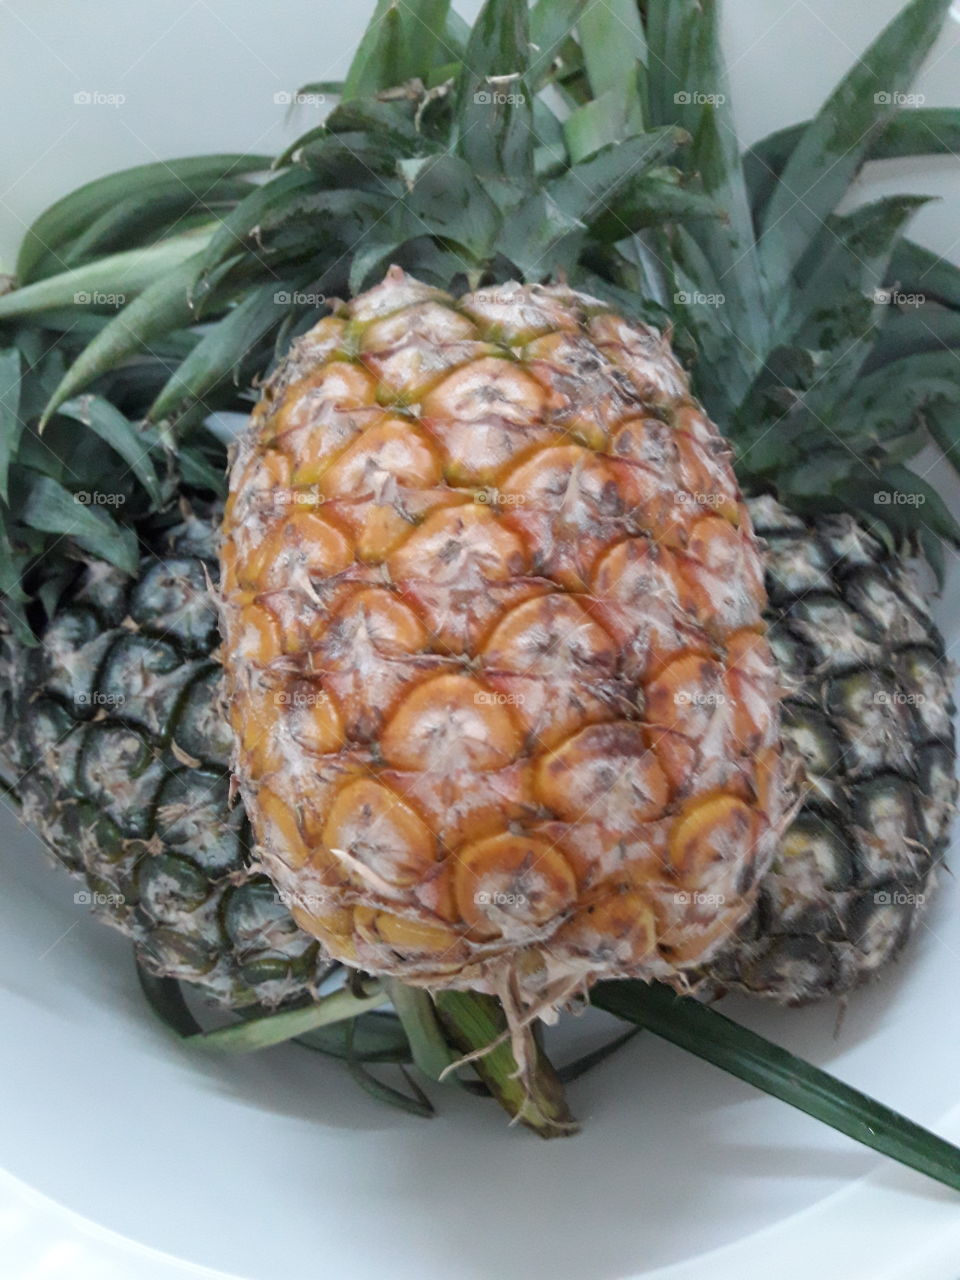 Pineapples are tropical fruit.They contain vitamin c and manganese.They are excellent at healing sore gums and revitalizing our immune system.They are also a source of vitamin B1,B6 as well as folate.All of these help maintain the integrity our body.